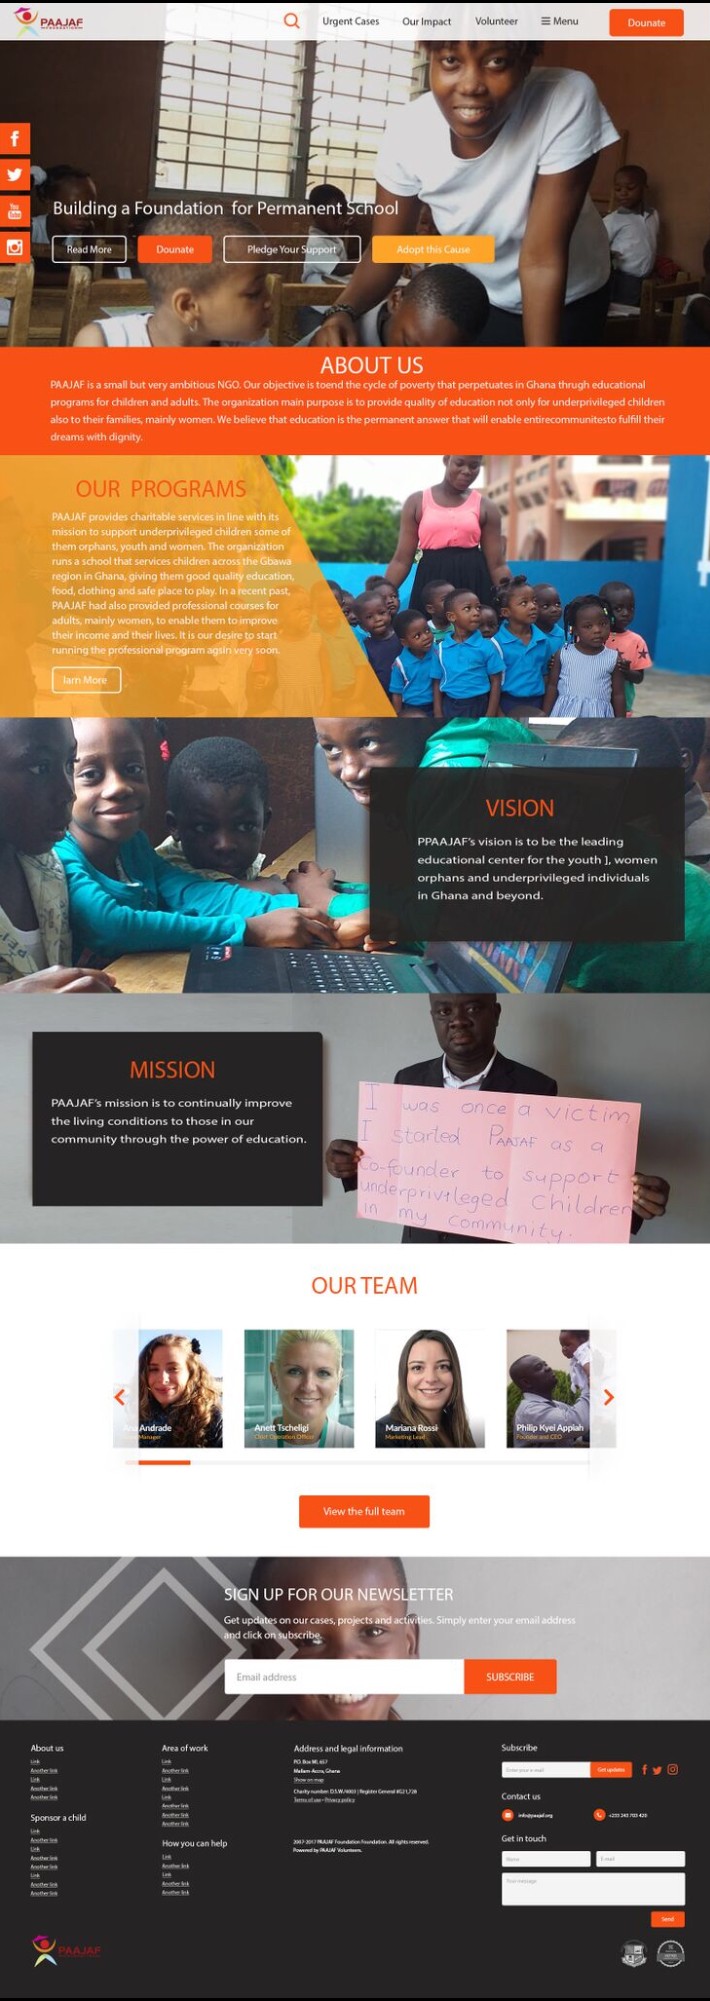 Redesign website homepage for PAAJAF Foundation